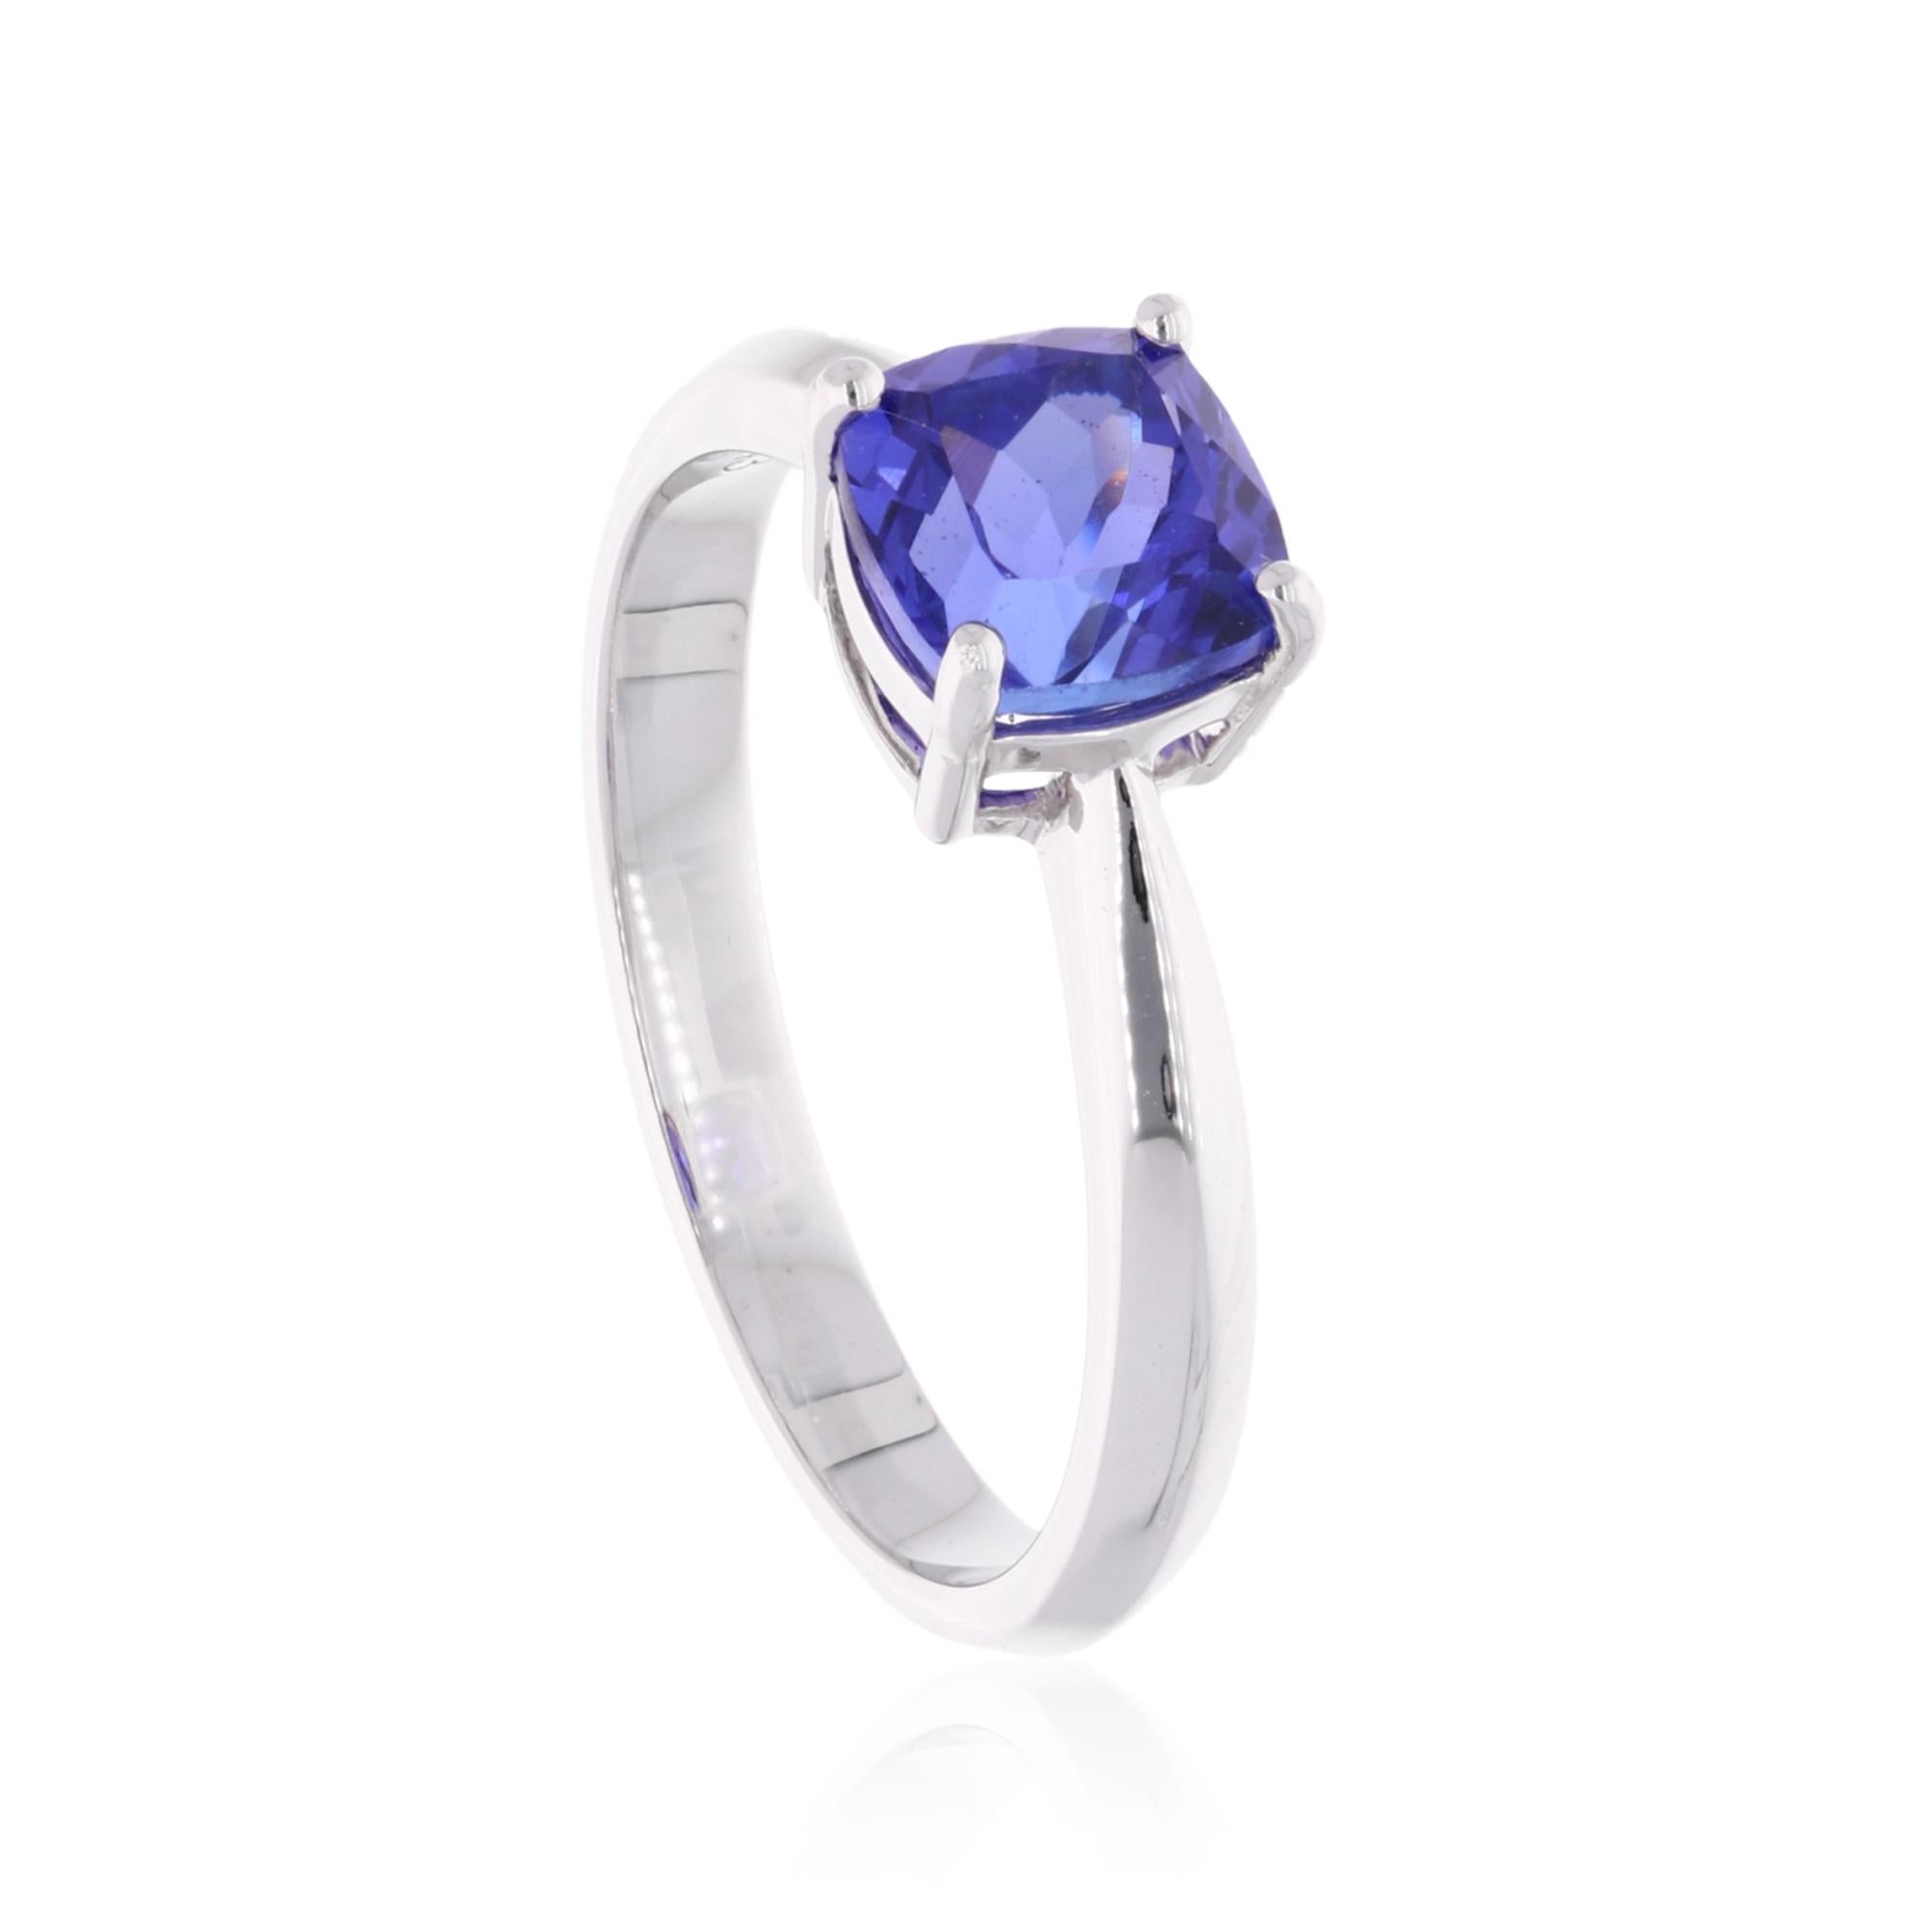 Item Code :- SER-22339
Gross Weight :- 3.53 grams
18k Solid White Gold Weight :- 3.20 gram
Natural Tanzanite Weight :- 1.67 Carat
Ring Size :- 7 US & All size available

✦ Sizing
.....................
We can adjust most items to fit your sizing